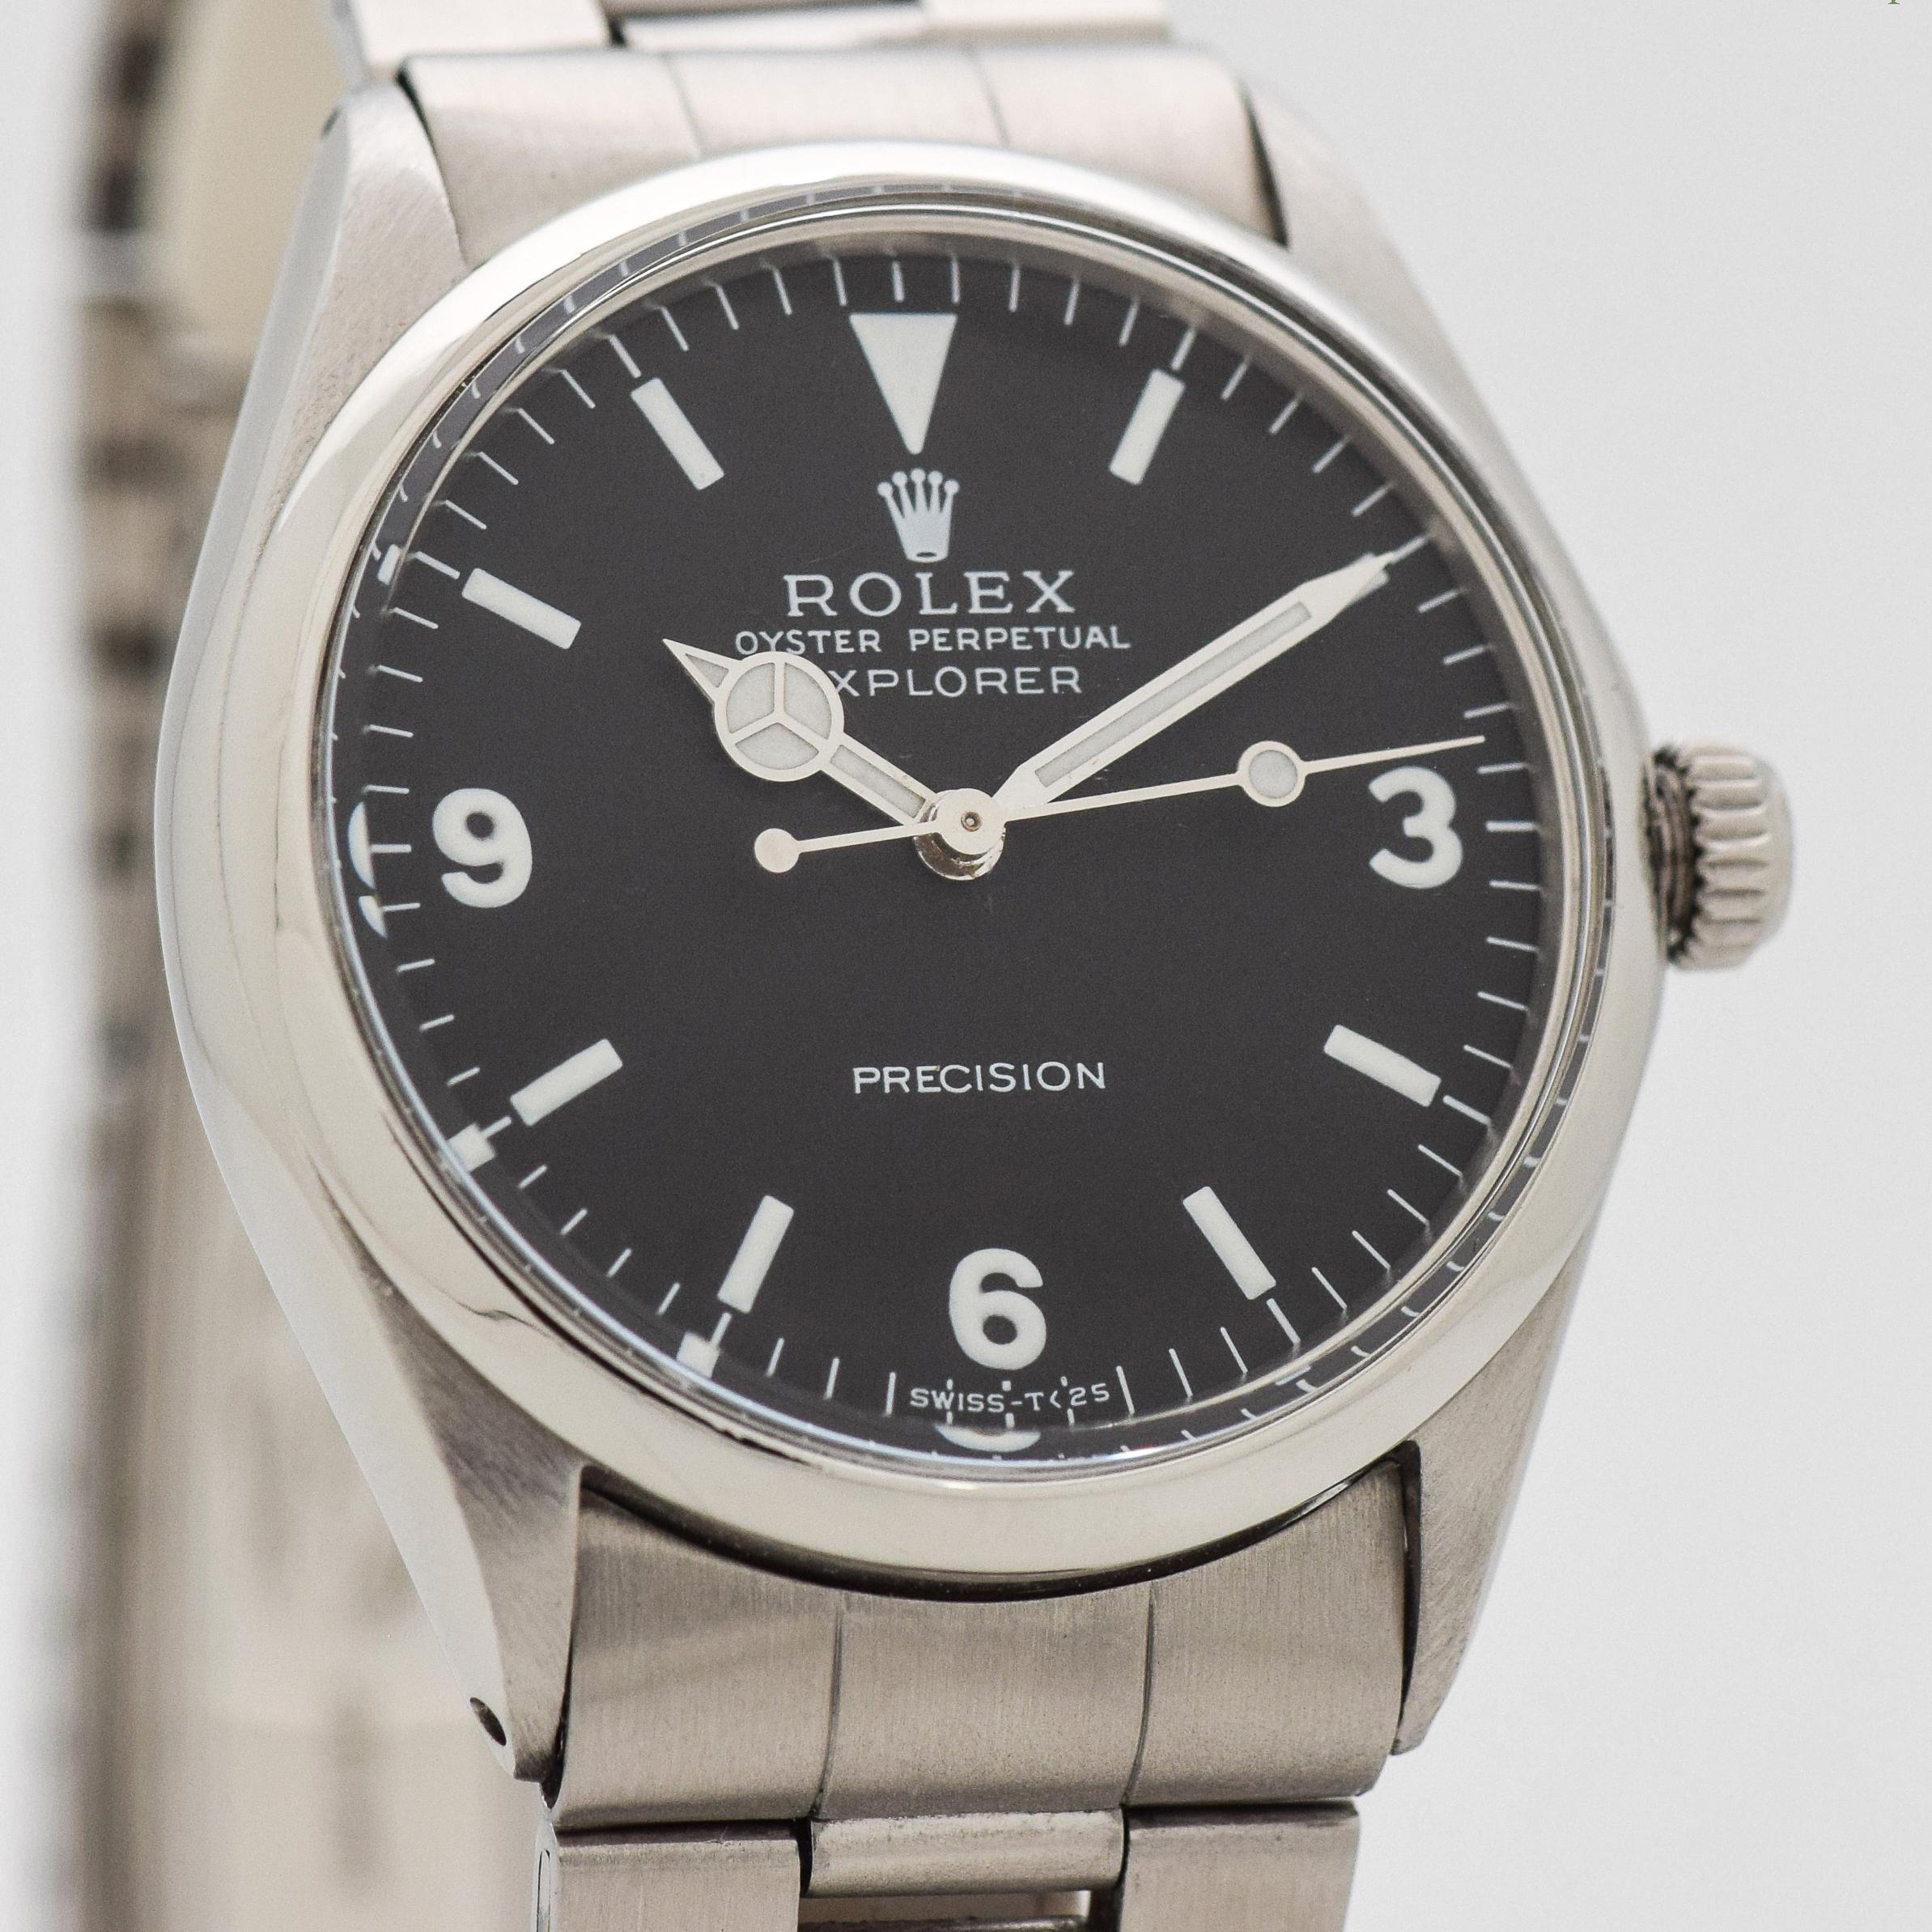 1967 Vintage Rolex Explorer Reference 5500. Original, but restored dial with luminous, markers. Mercedes-Rolex hands. Comes equipped with an original, Rolex Stainless Steel Oyster Bracelet. 34mm x 38mm lug to lug (1.34 in. x 1.5 in.) - Triple Signed.